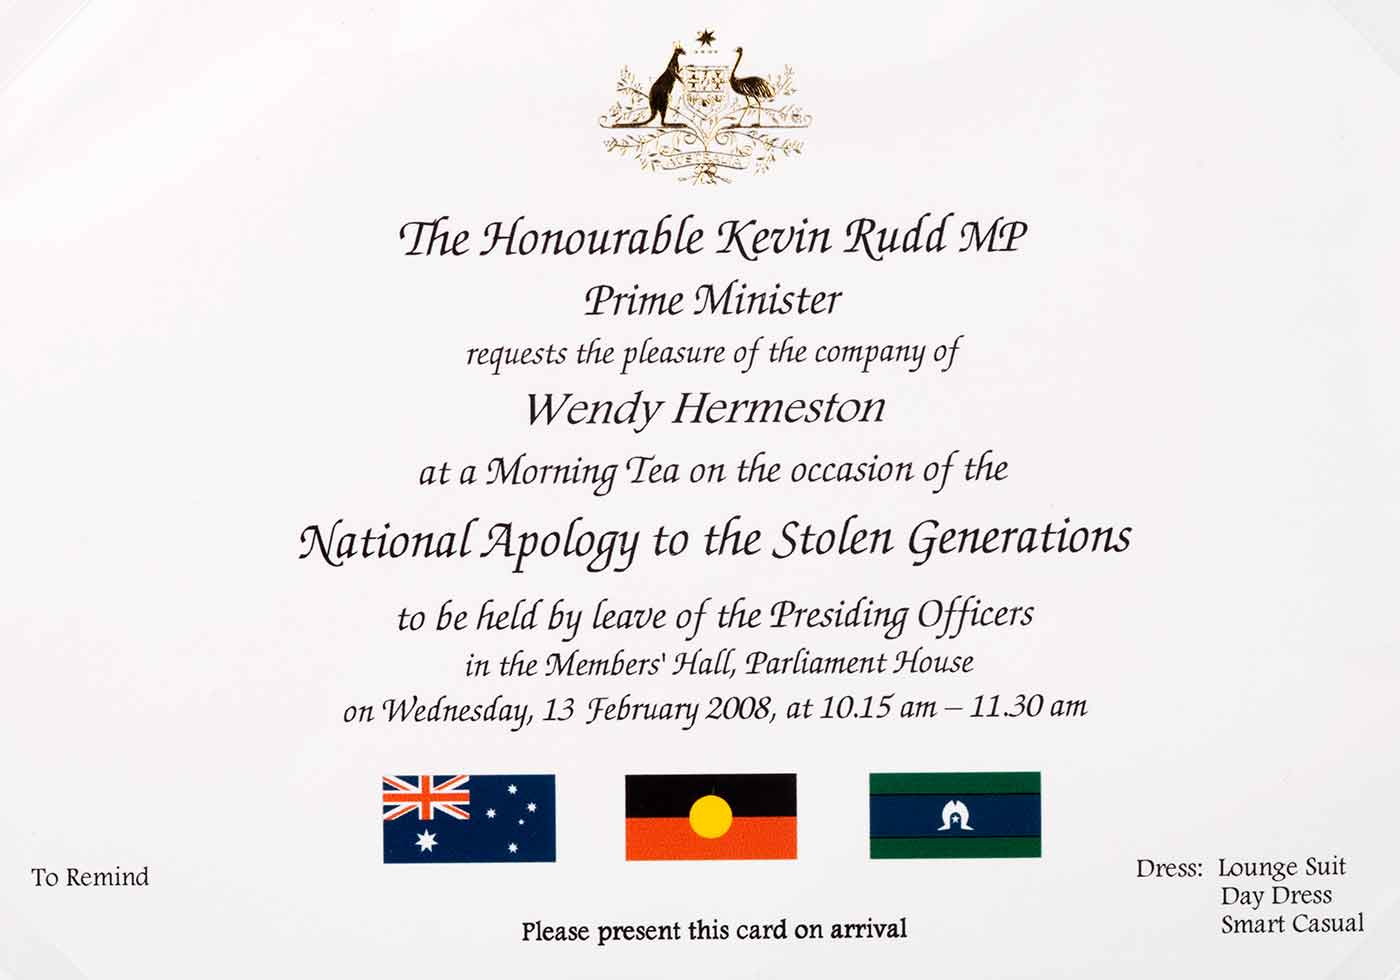 Invitation to Wendy Hermeston from the Prime Minister to attend the Apology to the Stolen Generations.